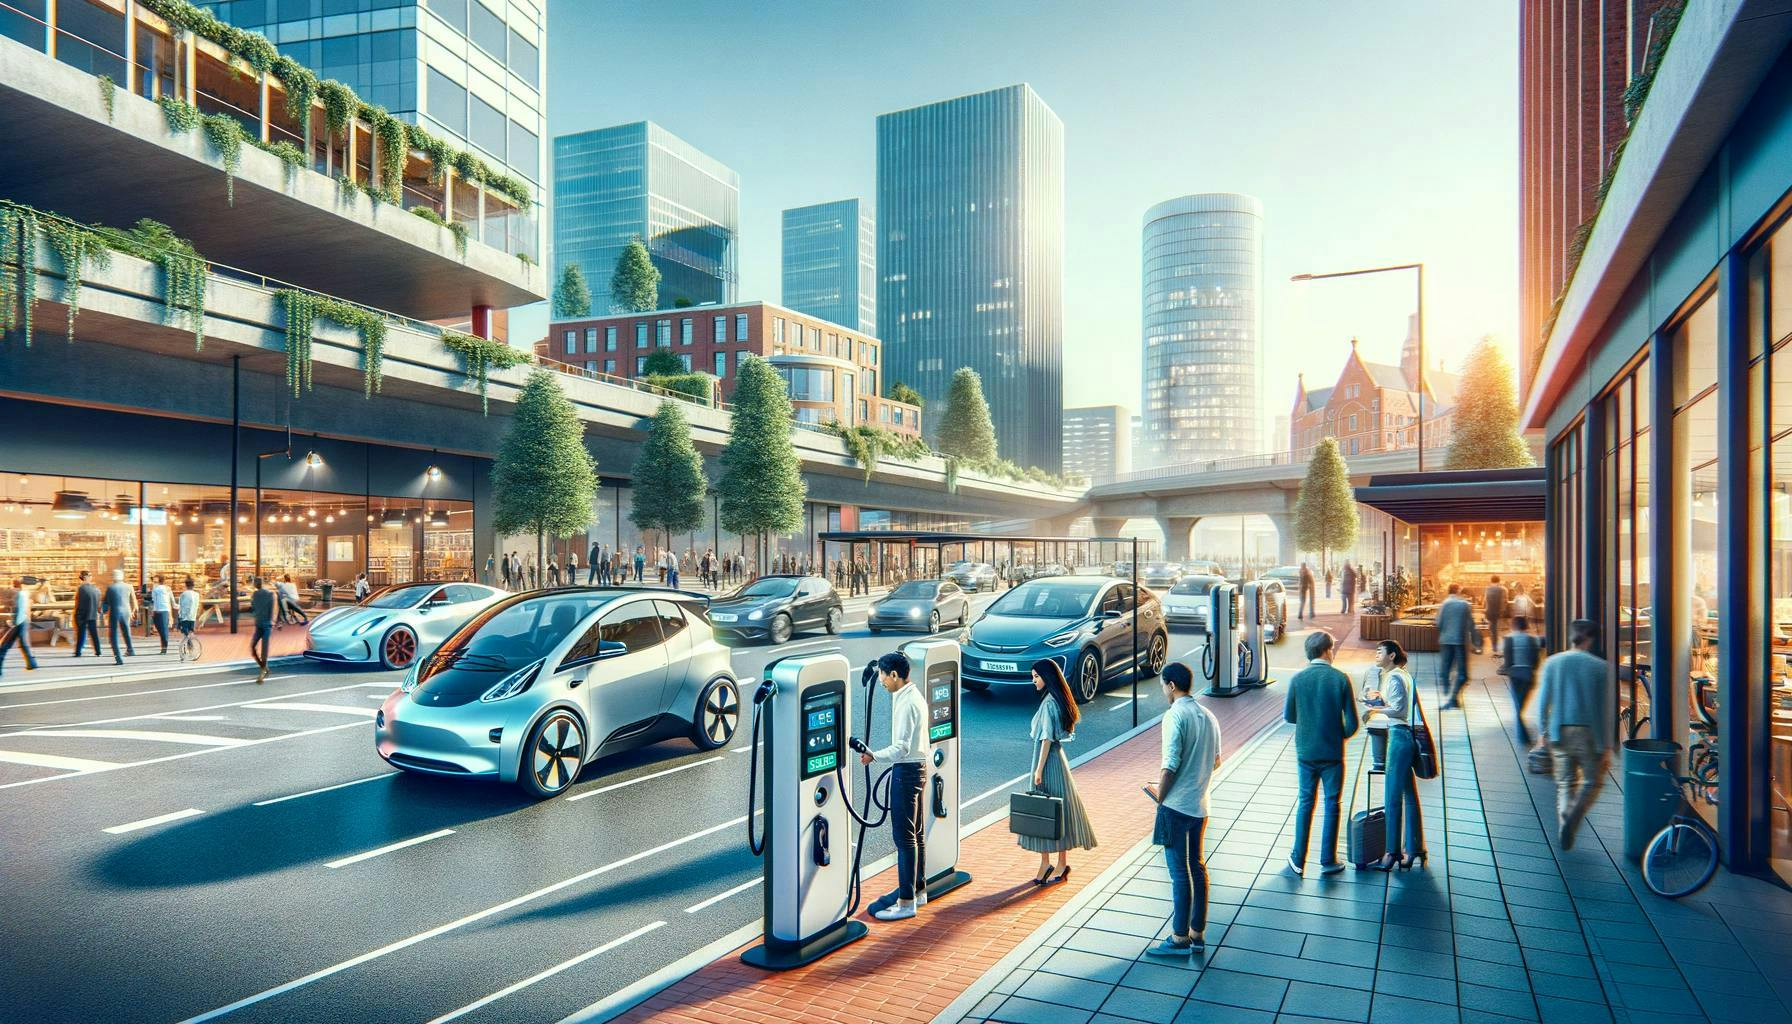 Electric cars charging at stations while pedestrians walk along a busy, modern cityscape with high-rise buildings, greenery, and commercial establishments.